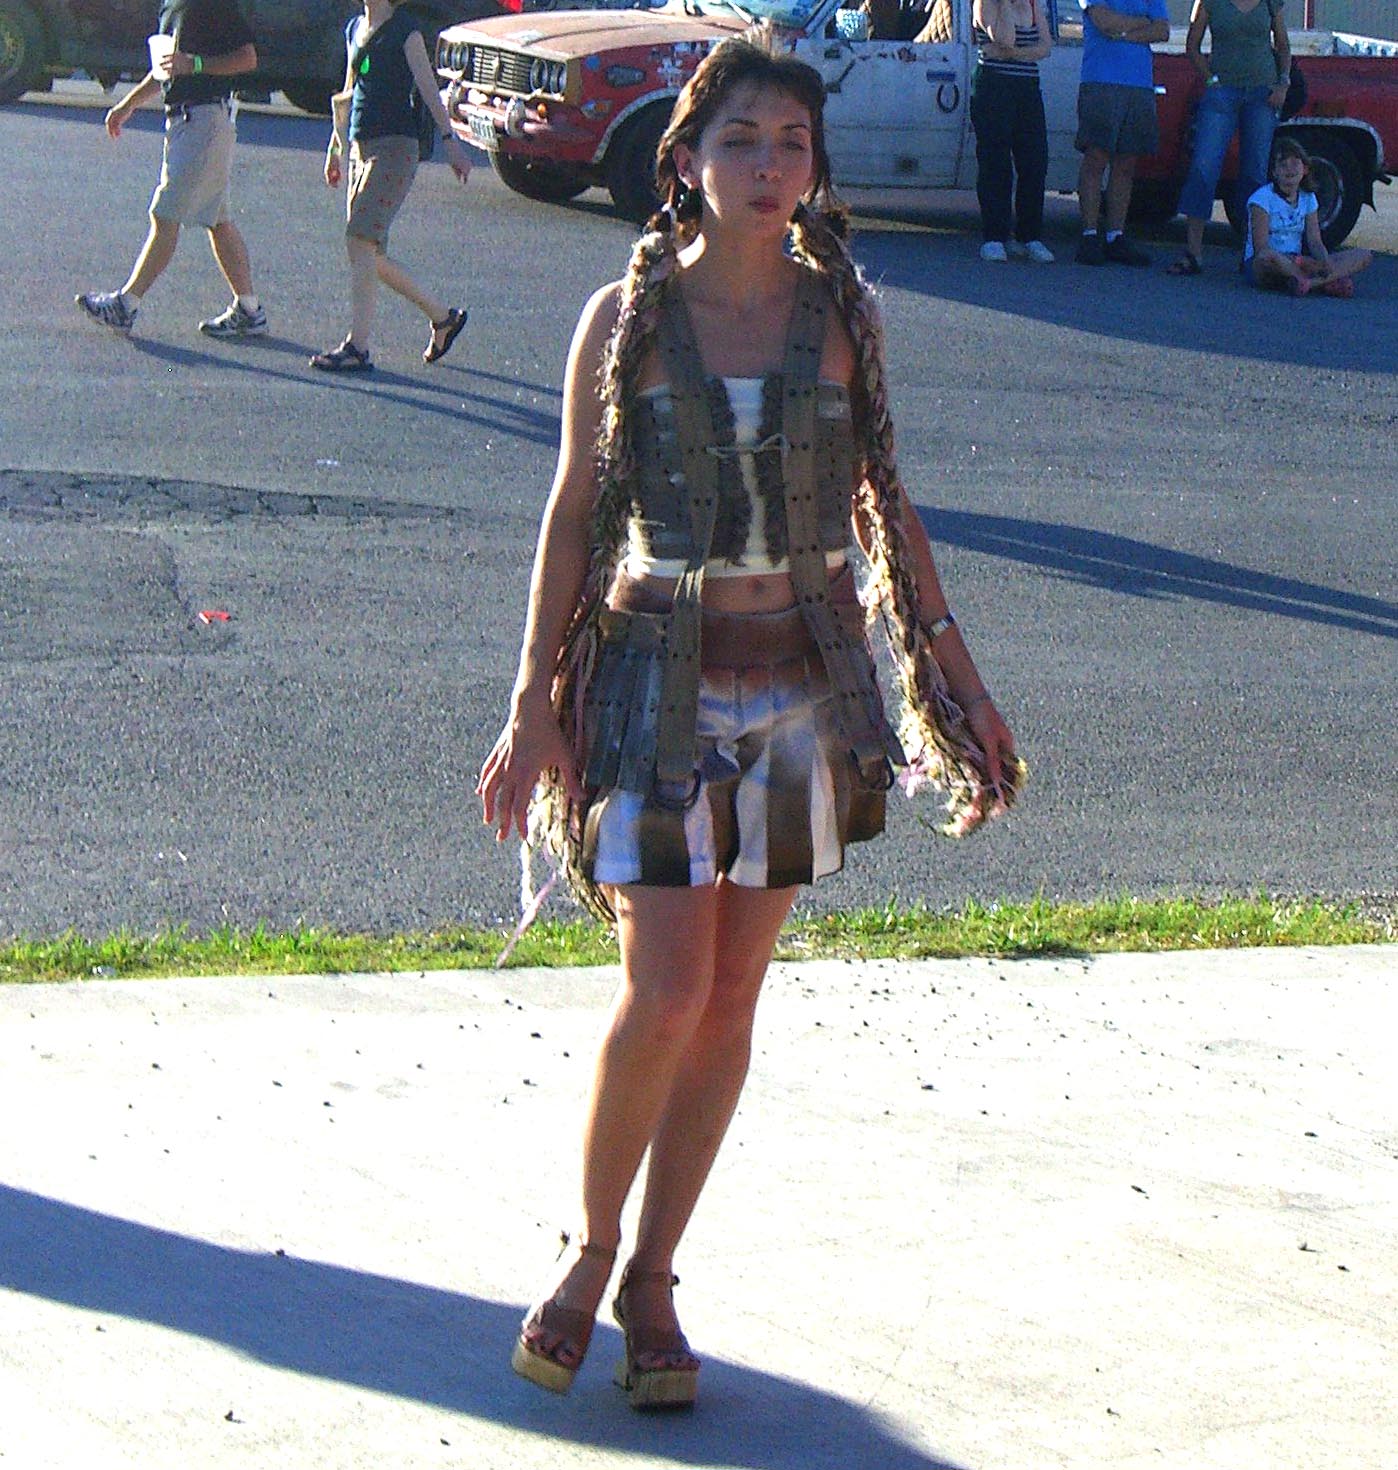 An outfit made of recycled materials, with a fringe made of something resembling backpack straps, shown at the Maker Faire 2007